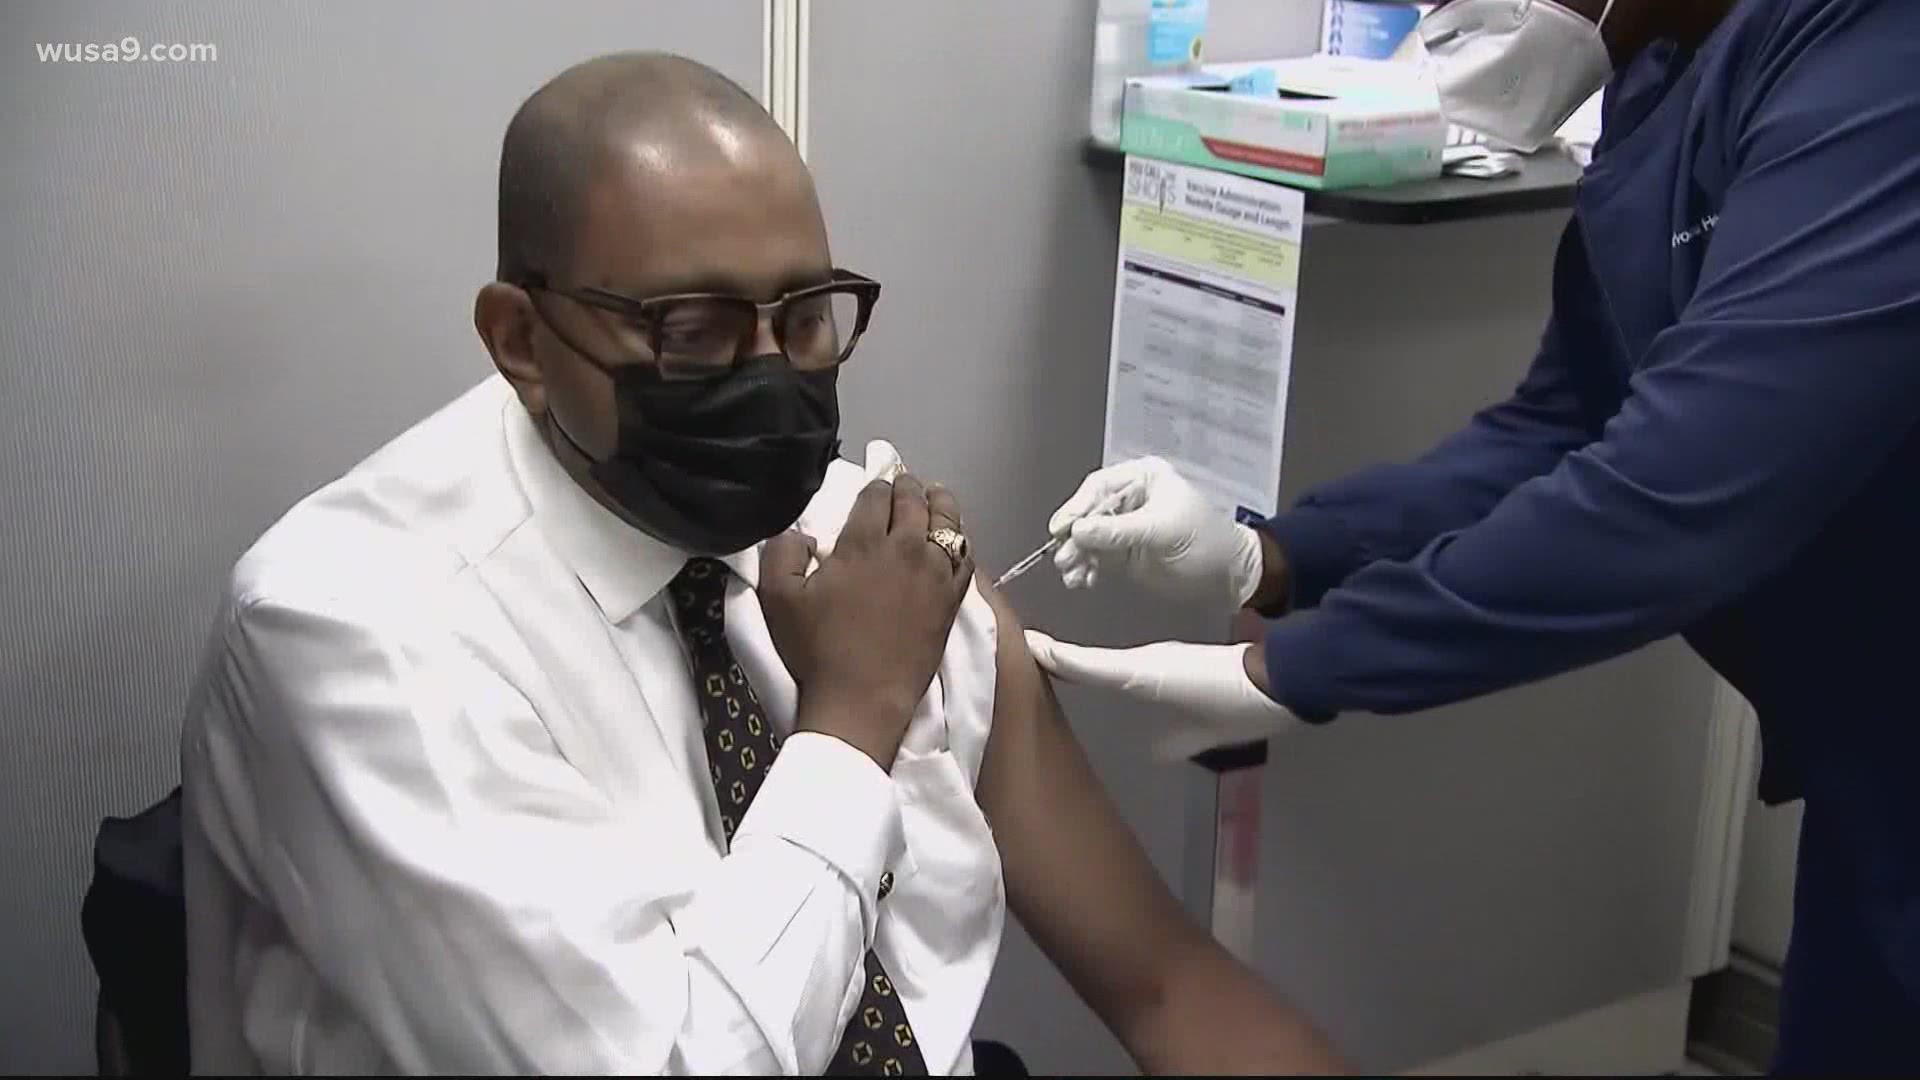 As of noon Wednesday, 48,513 individuals had already pre-registered for a vaccination appointment, the mayor's office says.